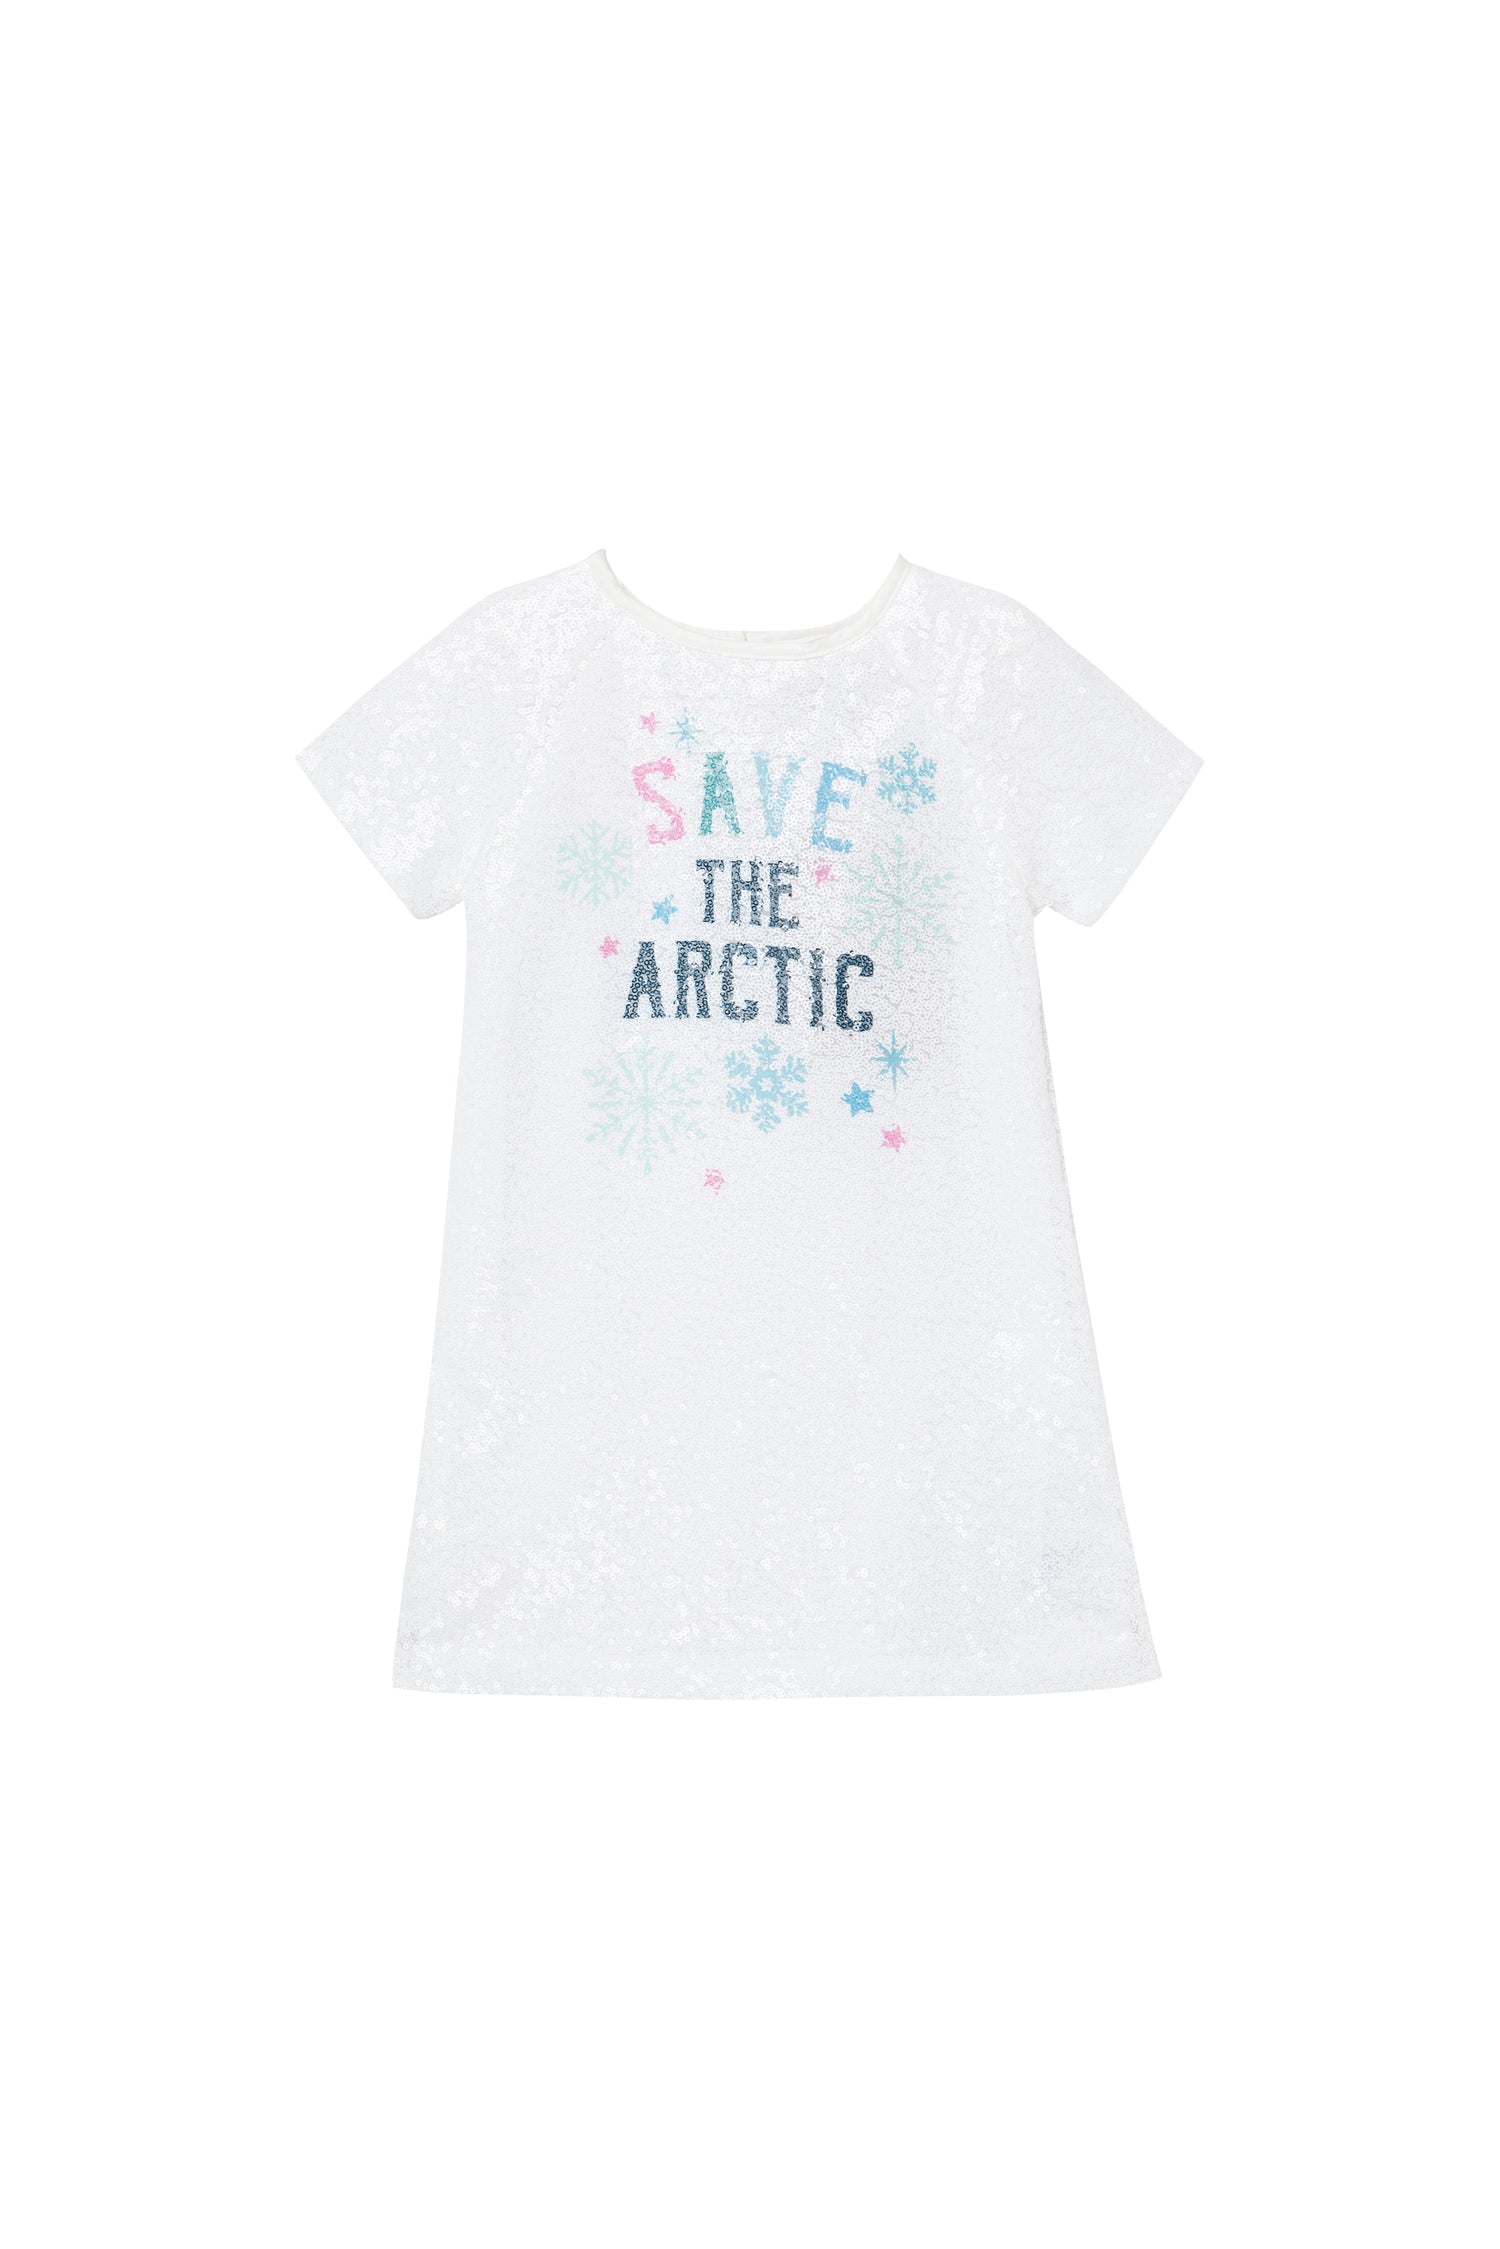 Front view of "Save the arctic" glitter tee